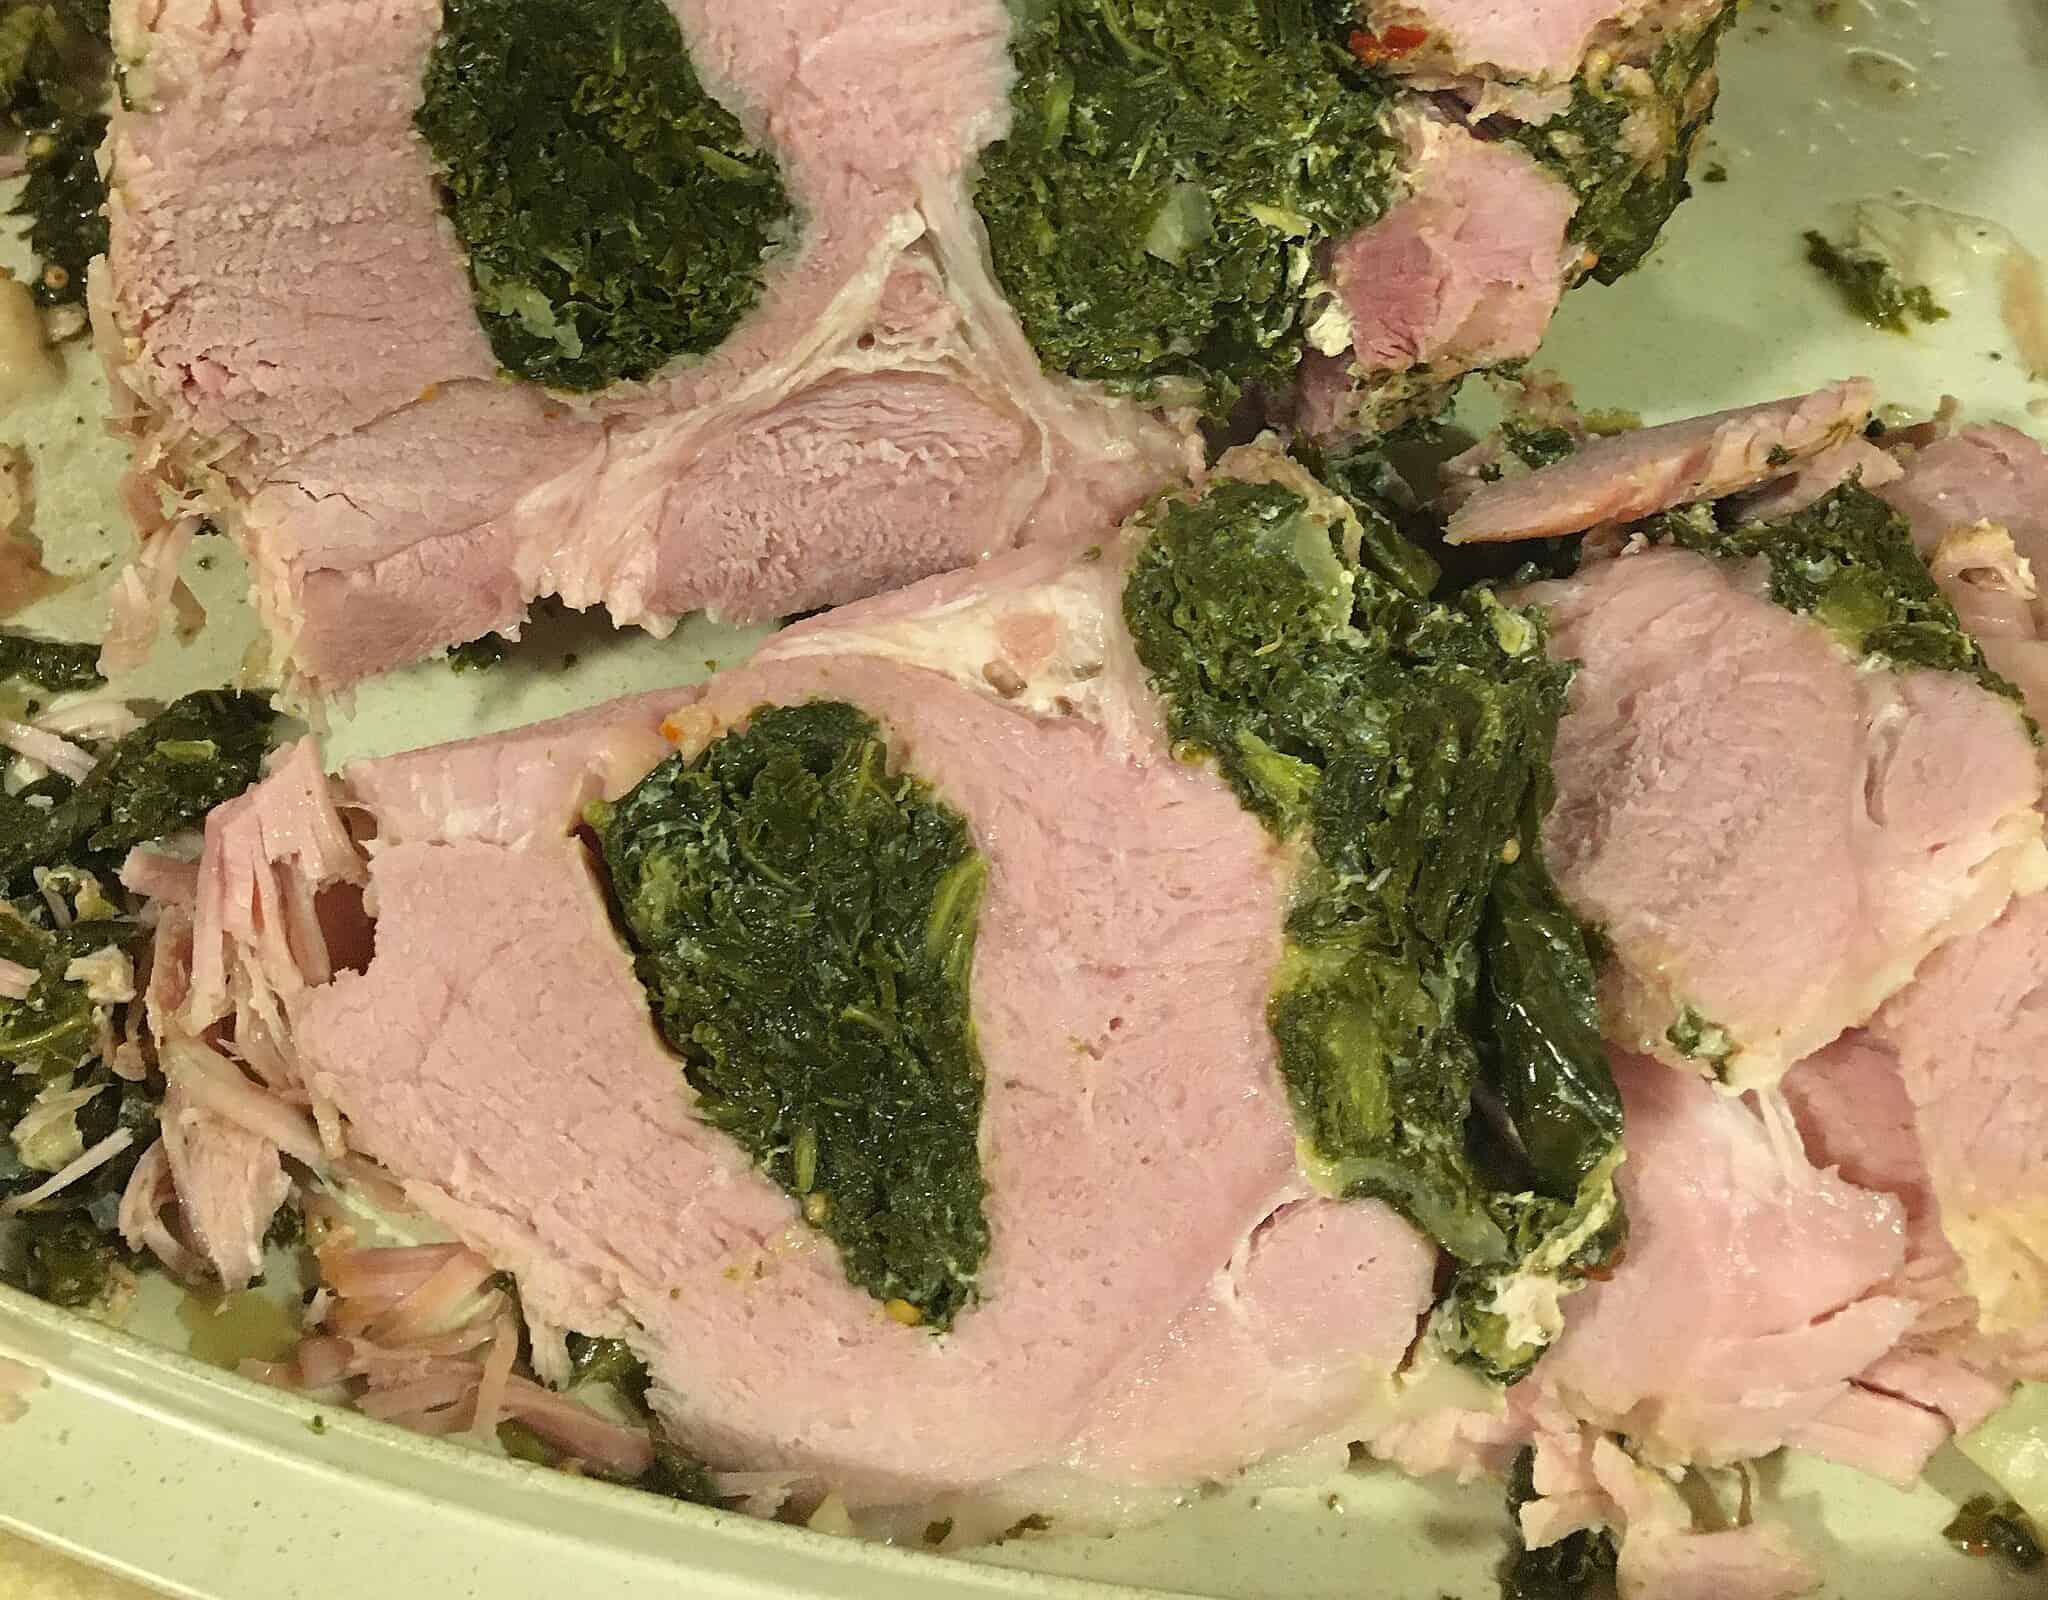 A unique food tradition that, Maryland stuffed ham is popular around the holidays.